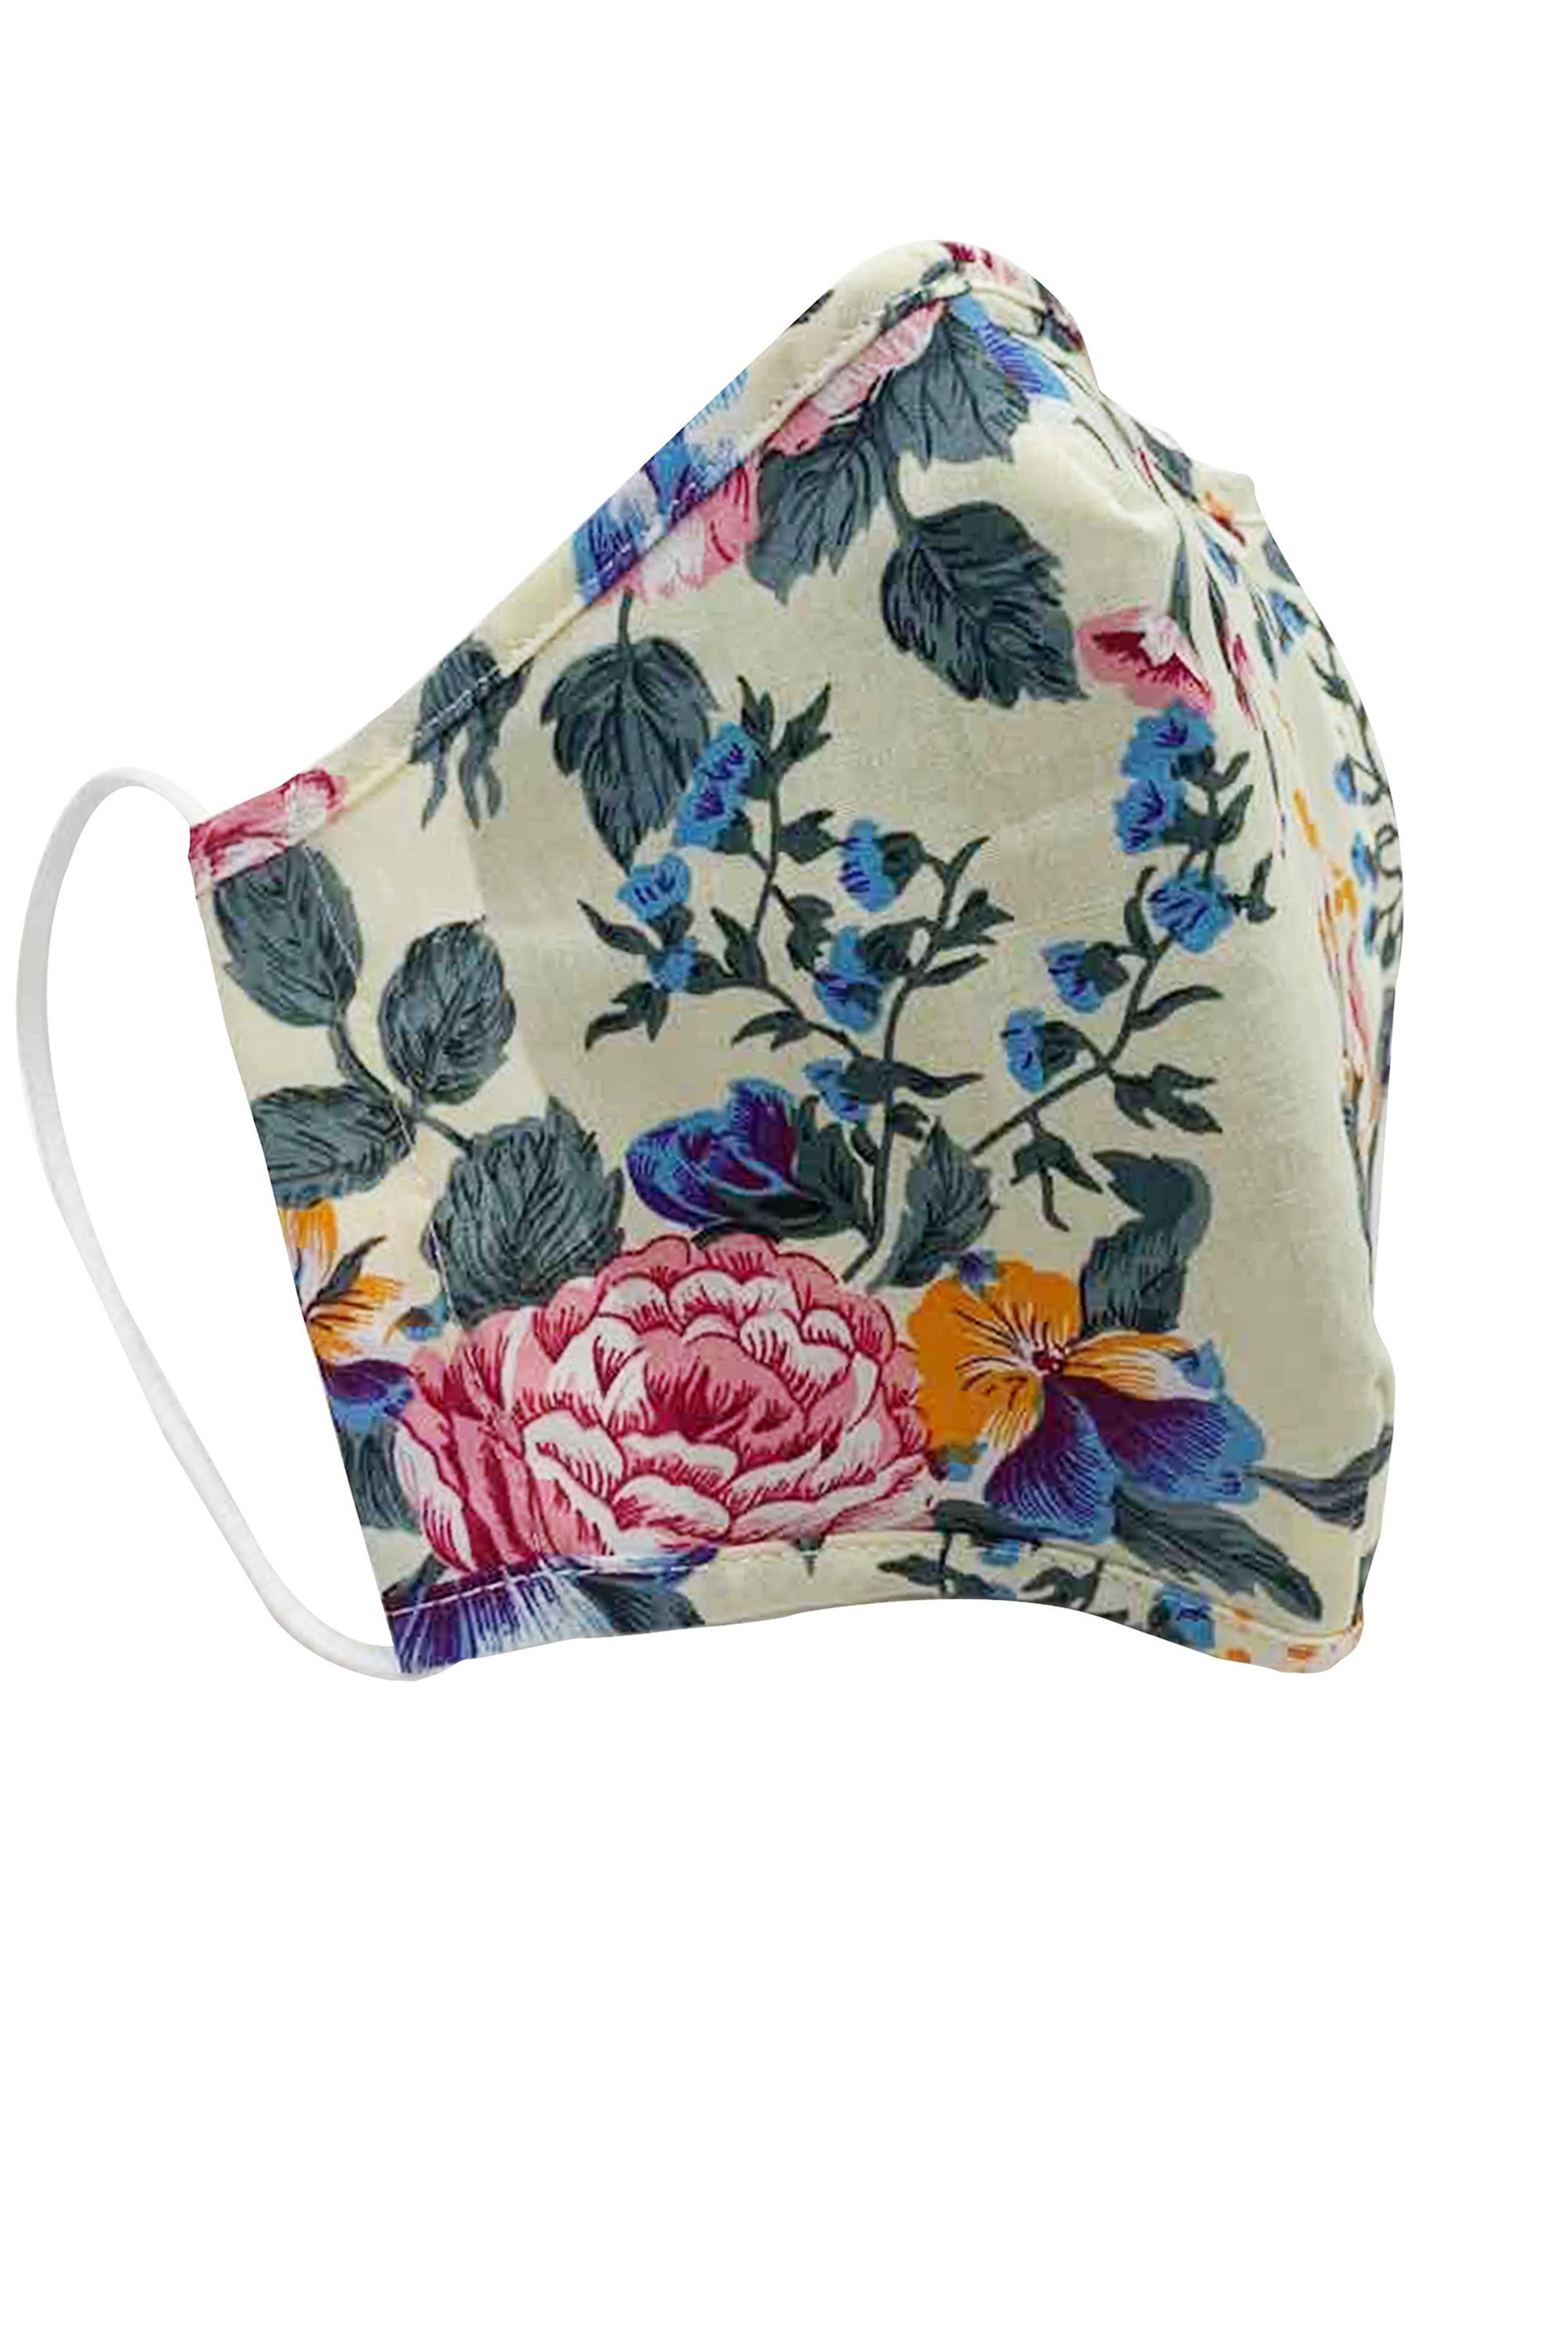 Colourful, comfortable (and crafted from cotton), choose this Retro Floral Face Mask for your essential trips. It's made from the end of our fabric rolls, so it's sustainable and kind to the planet.Please remember it is a non-medical mask and not PPE. Wash your hands before and after putting on the covering.One Pound from each covering is donated to Sufra, a charity that supports and provides food for people in extreme poverty.  100% Cotton, Lining:100% Cotton